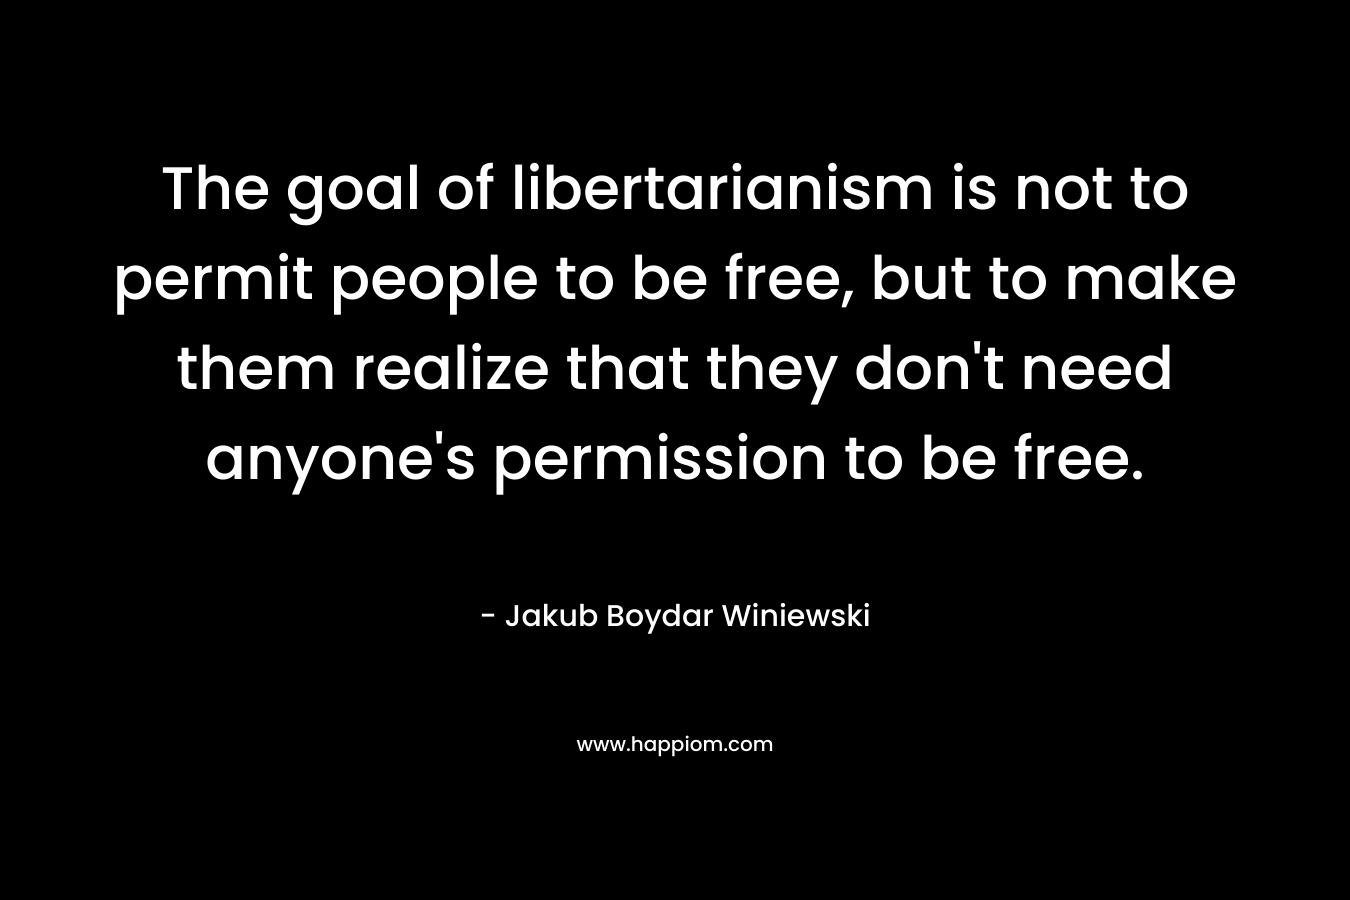 The goal of libertarianism is not to permit people to be free, but to make them realize that they don't need anyone's permission to be free.